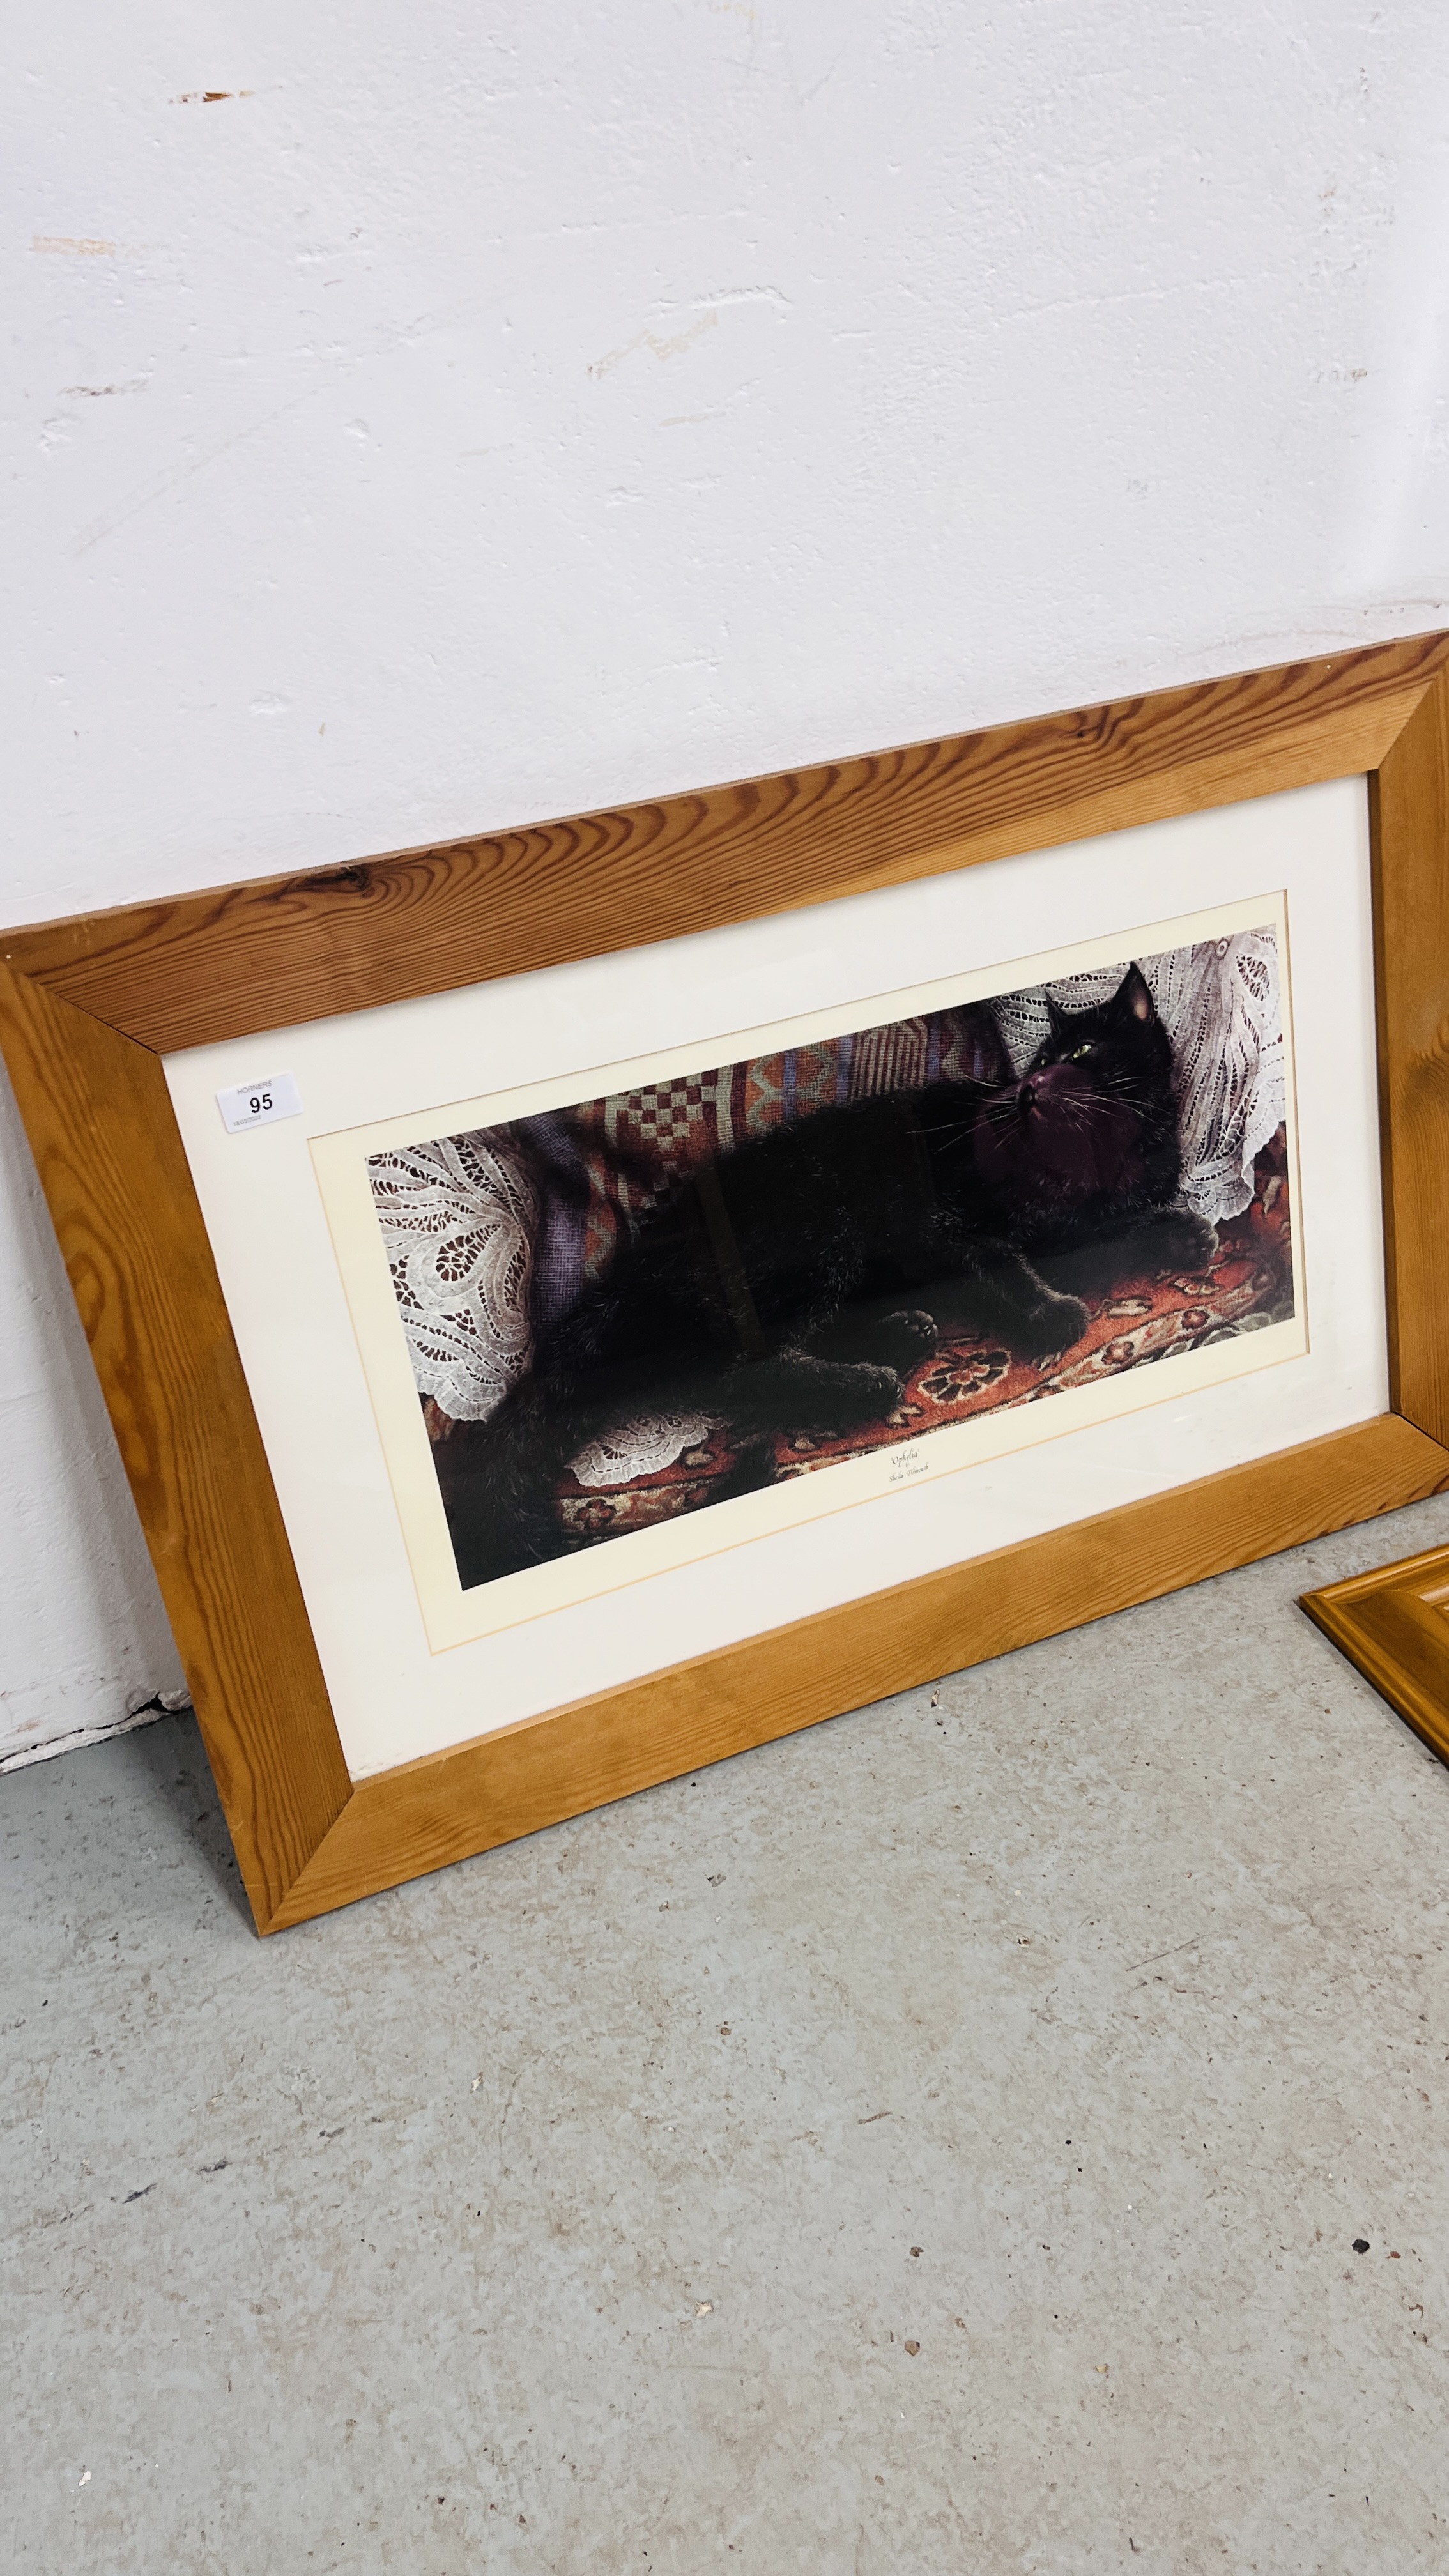 A PINE FRAMED SHEILA TILMOUTH PRINT "OPHELIA" 30 X 59CM ALONG WITH A PINE WALL MIRROR WITH INSET - Image 5 of 6